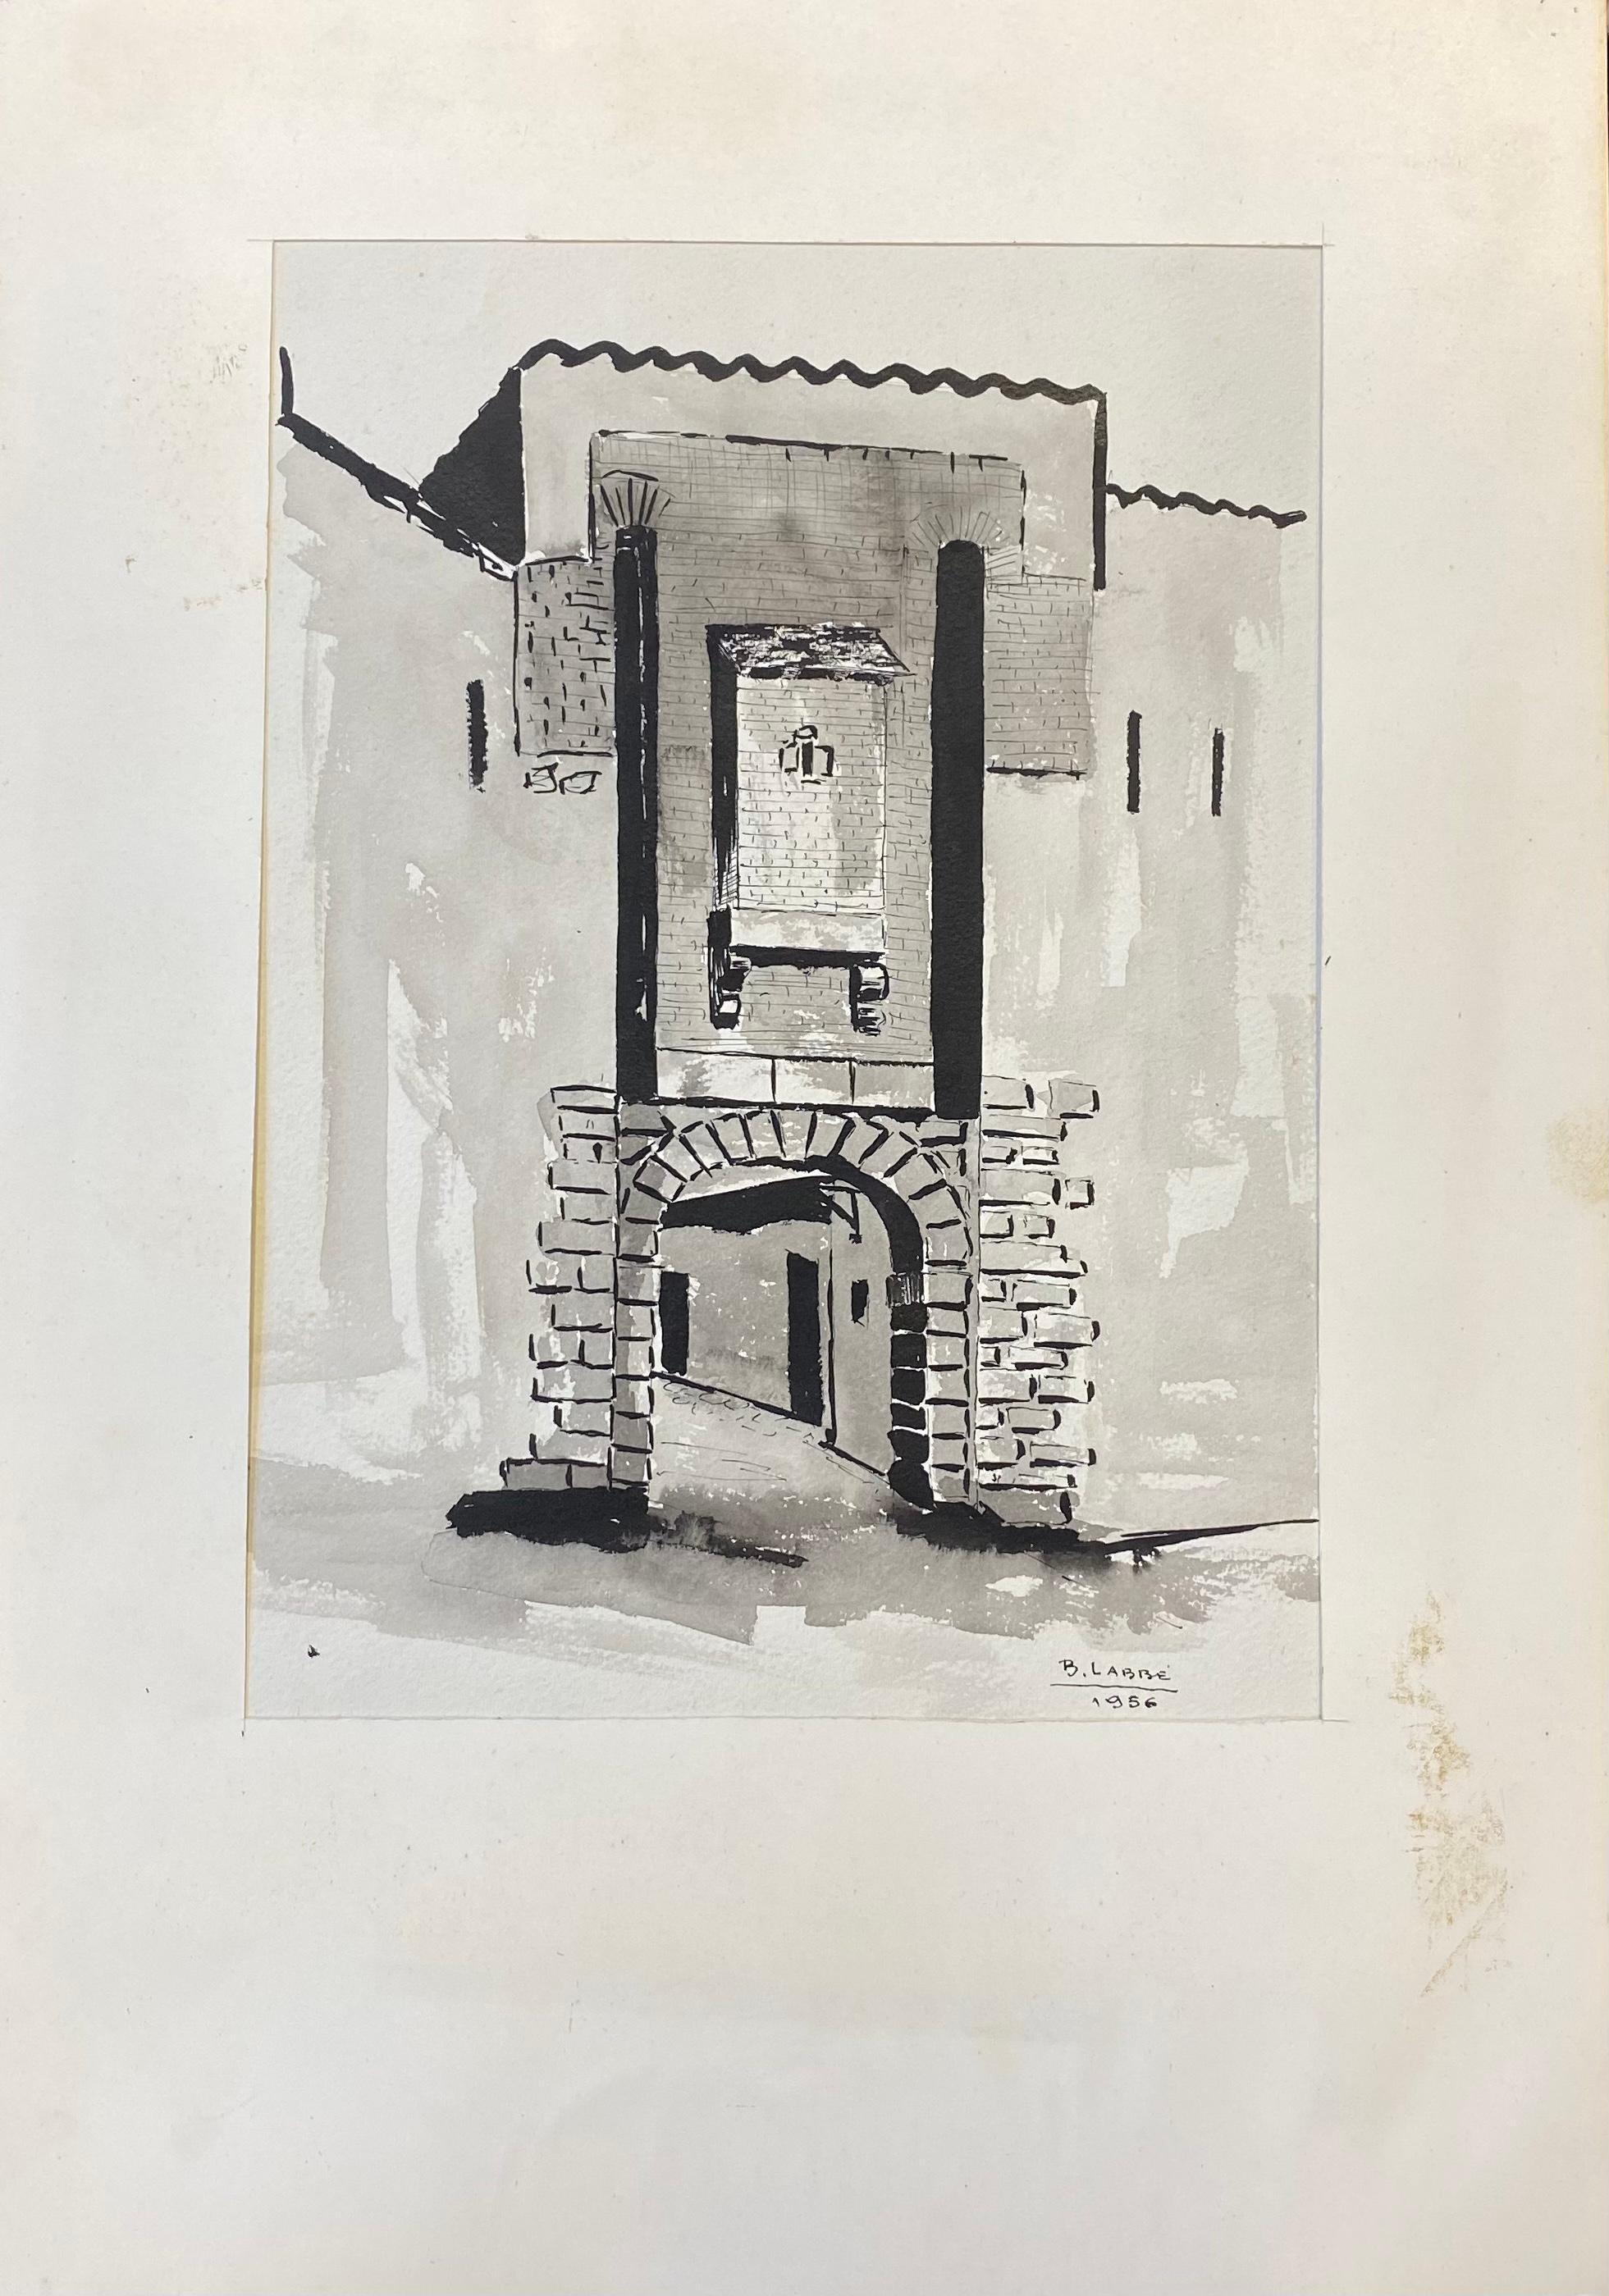 Black & White Archway
by Bernard Labbe (French mid 20th century)
signed original watercolour/ gouache mounted painting on paper board, unframed
size: 15.75 x 11 inches
condition: very good and ready to be enjoyed. 

provenance: the artists